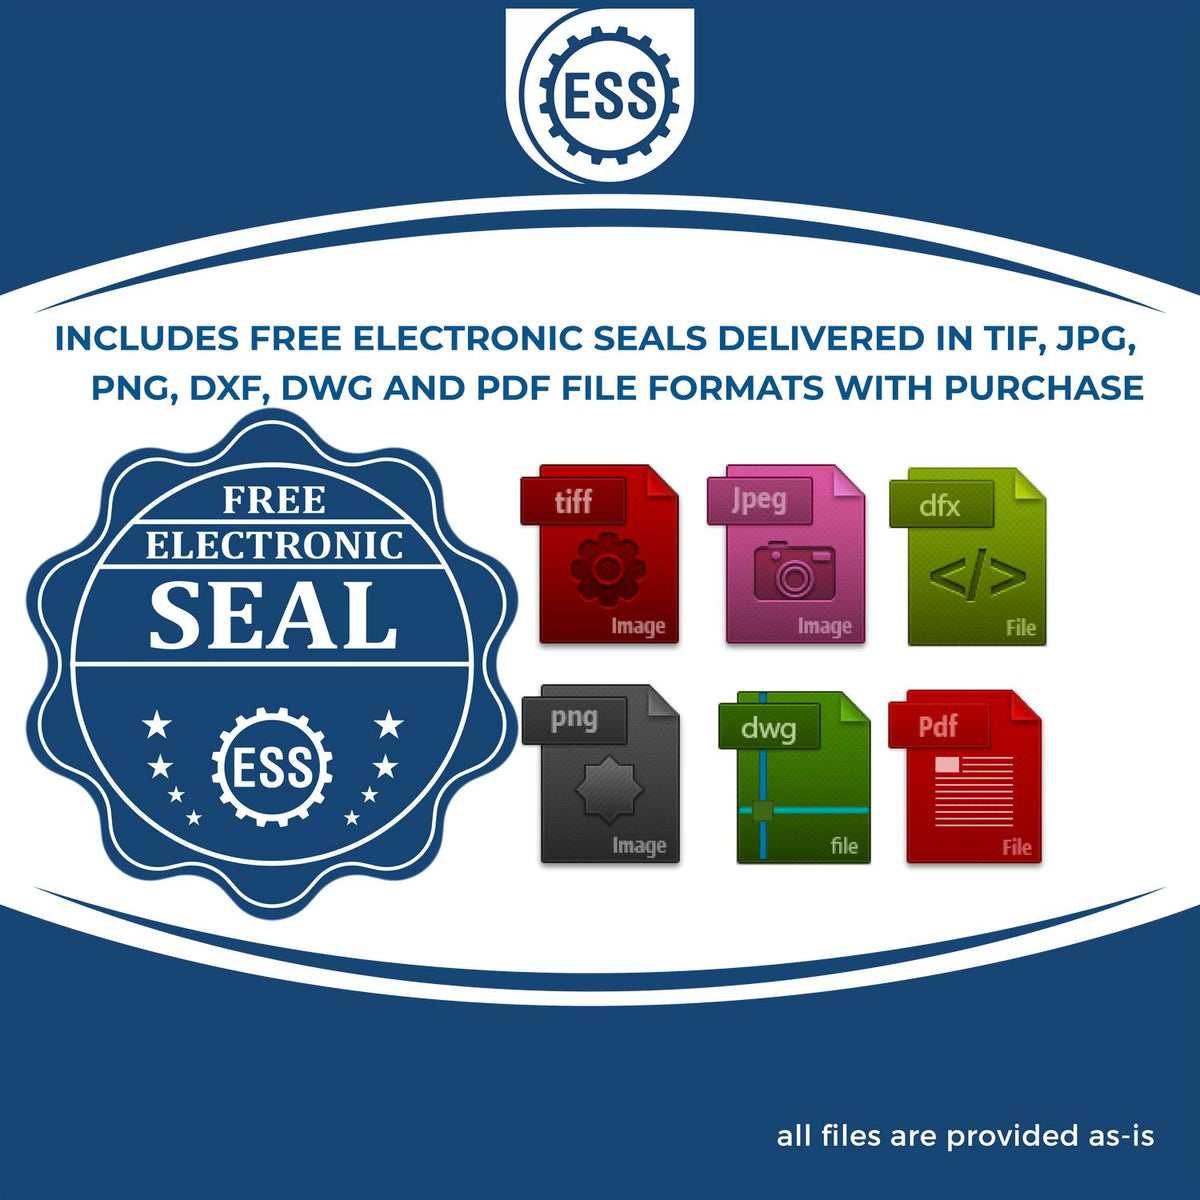 An infographic for the free electronic seal for the Slim Pre-Inked Vermont Professional Engineer Seal Stamp illustrating the different file type icons such as DXF, DWG, TIF, JPG and PNG.